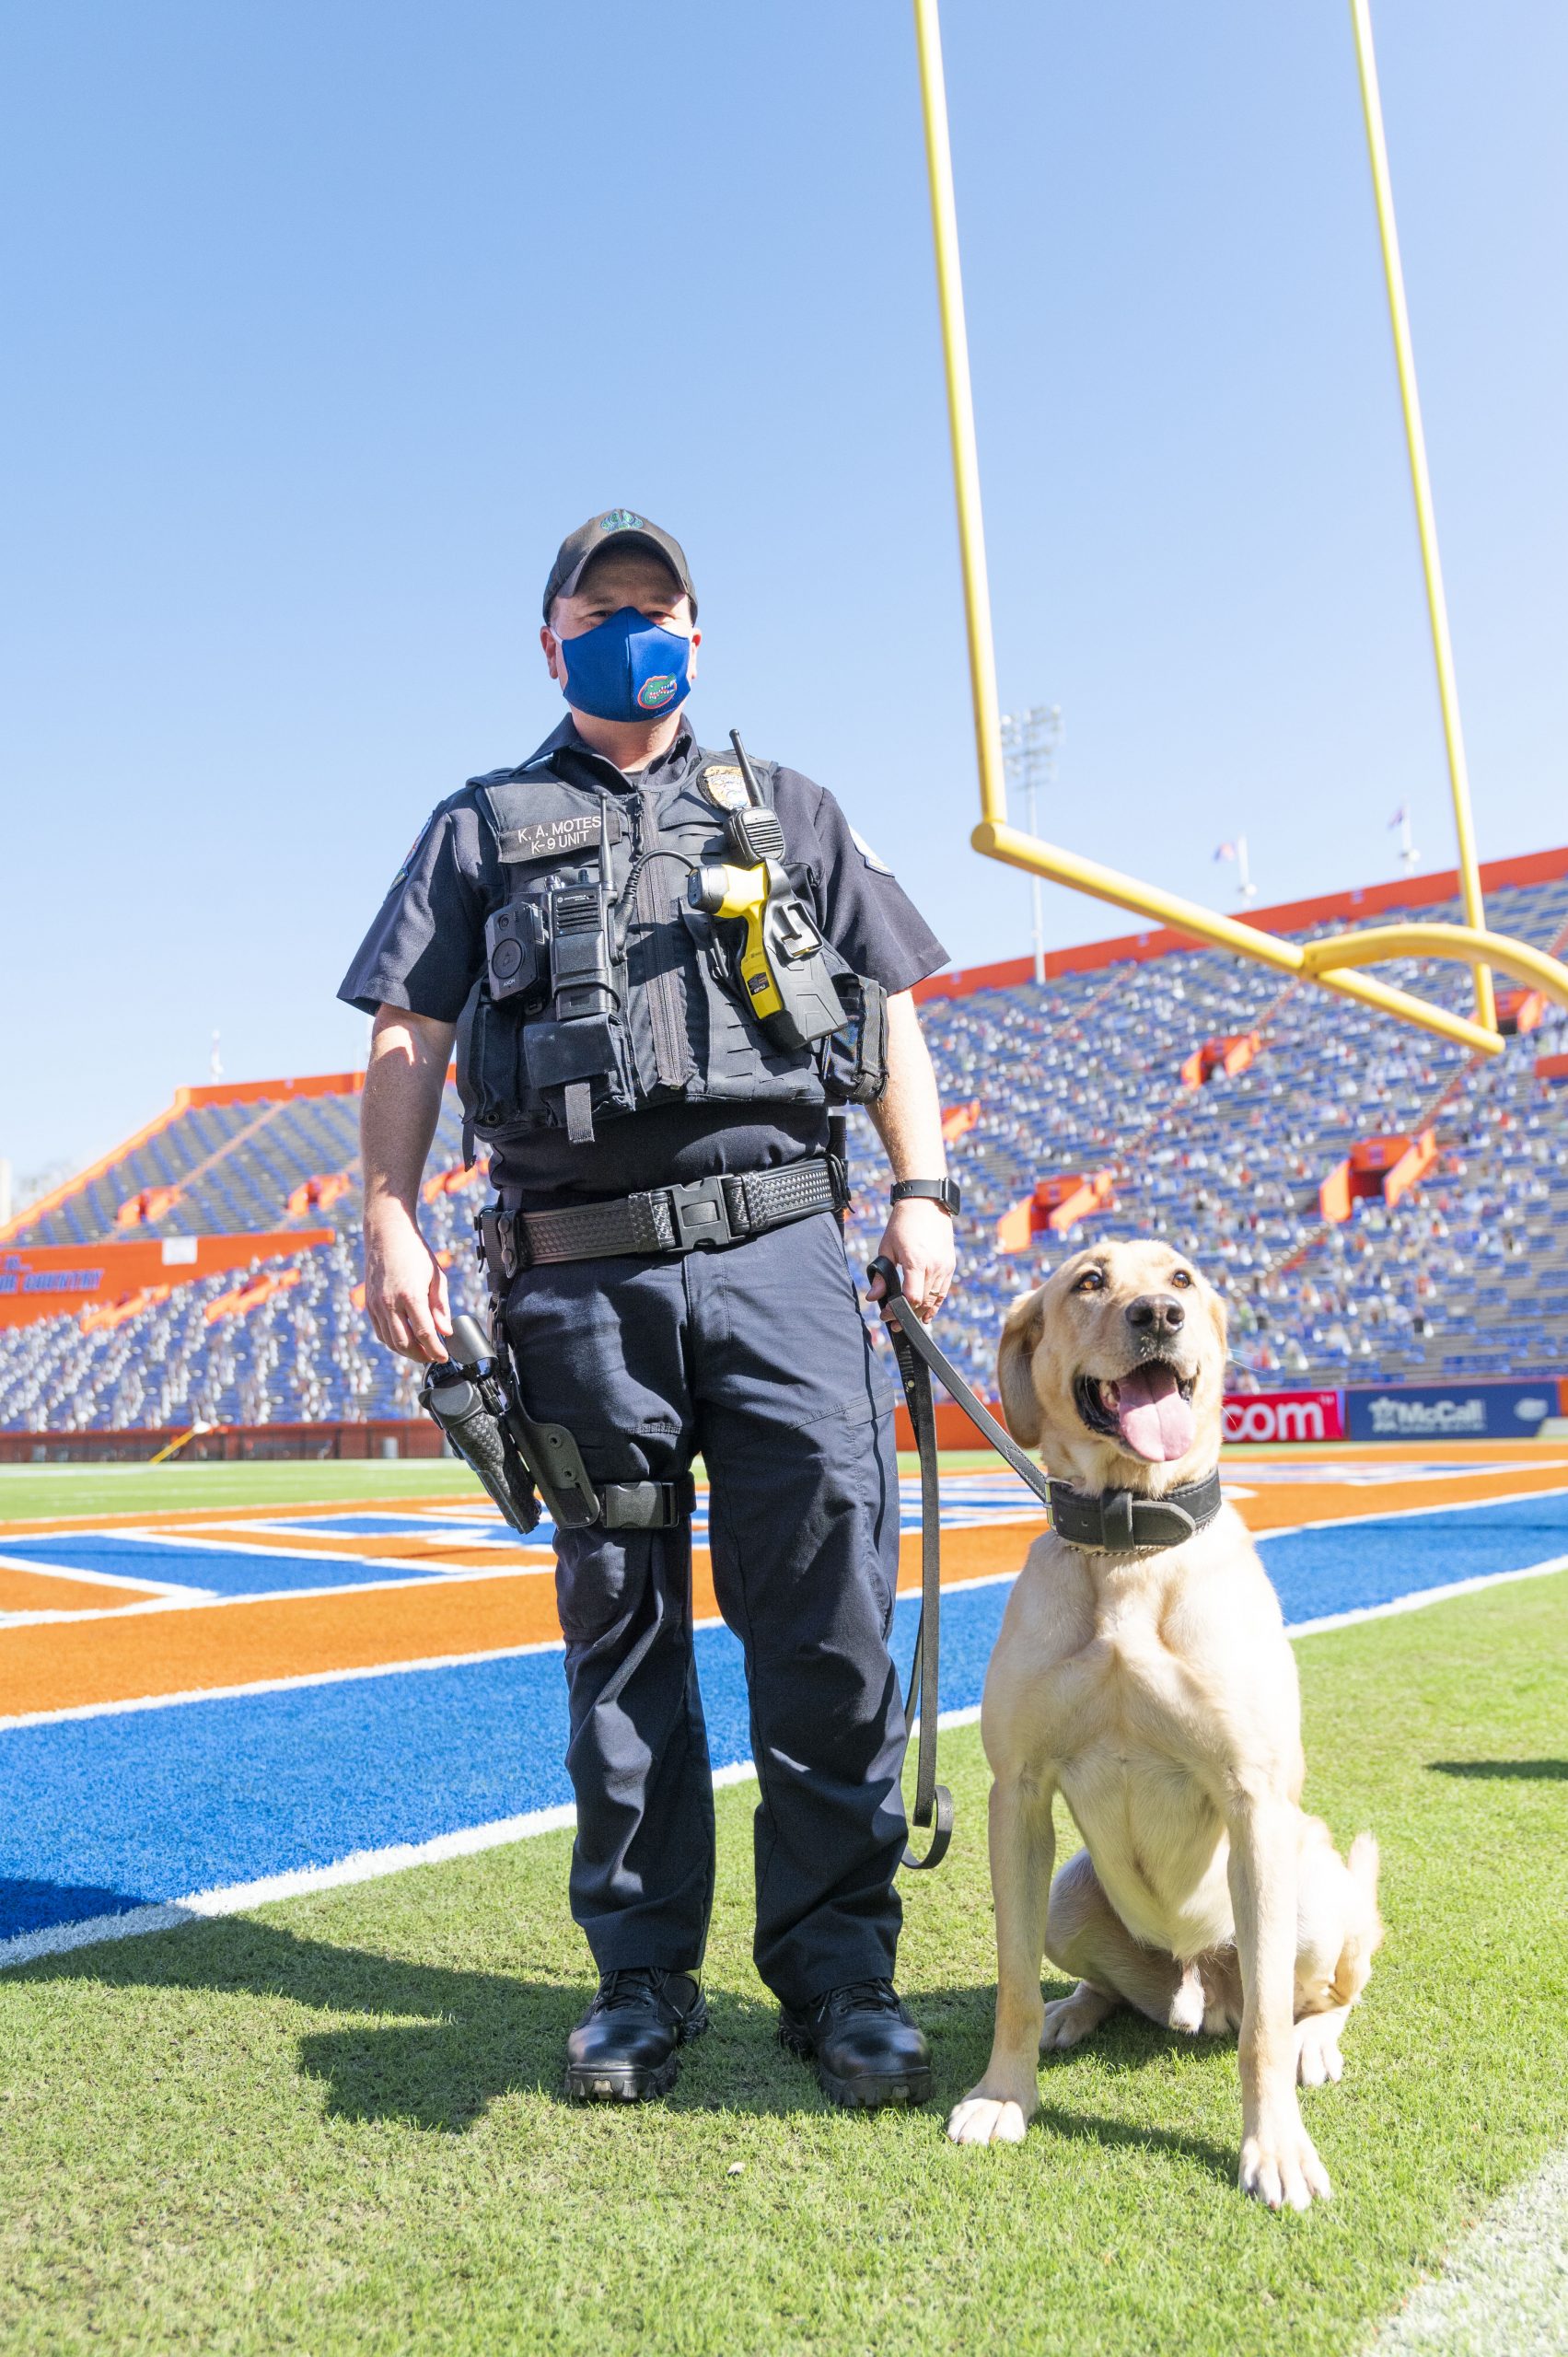 The Beacon of the University of Florida’s Safety has a National Talent Search